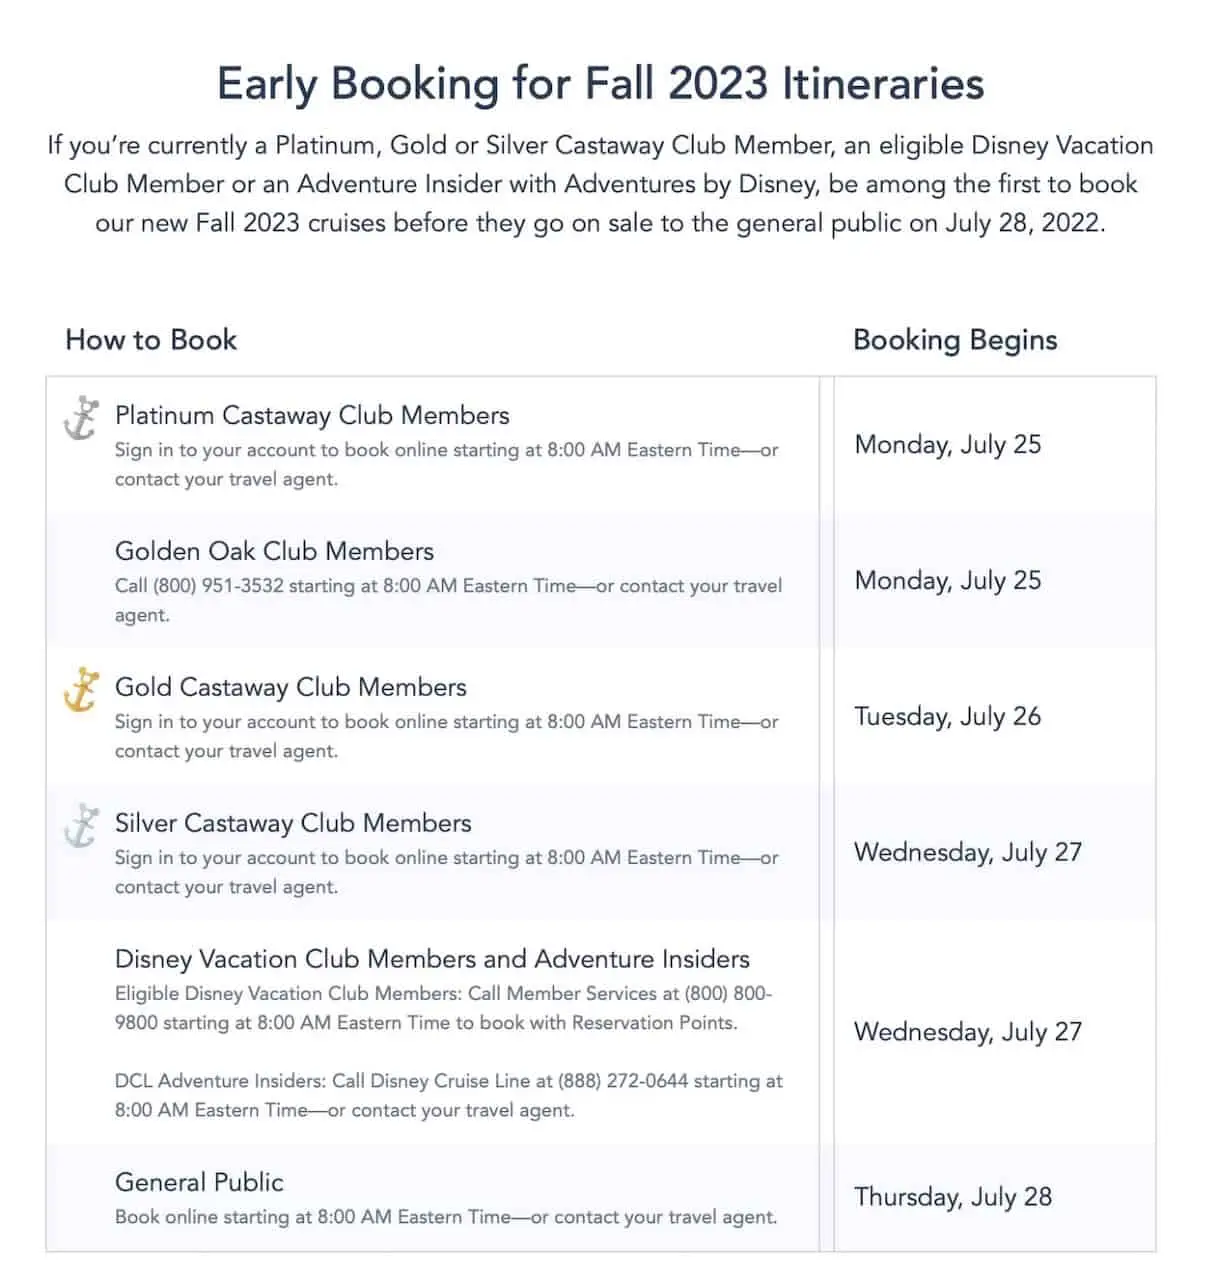 Fall 2023 Itineraries Released - The Disney Cruise Family Travel Blog